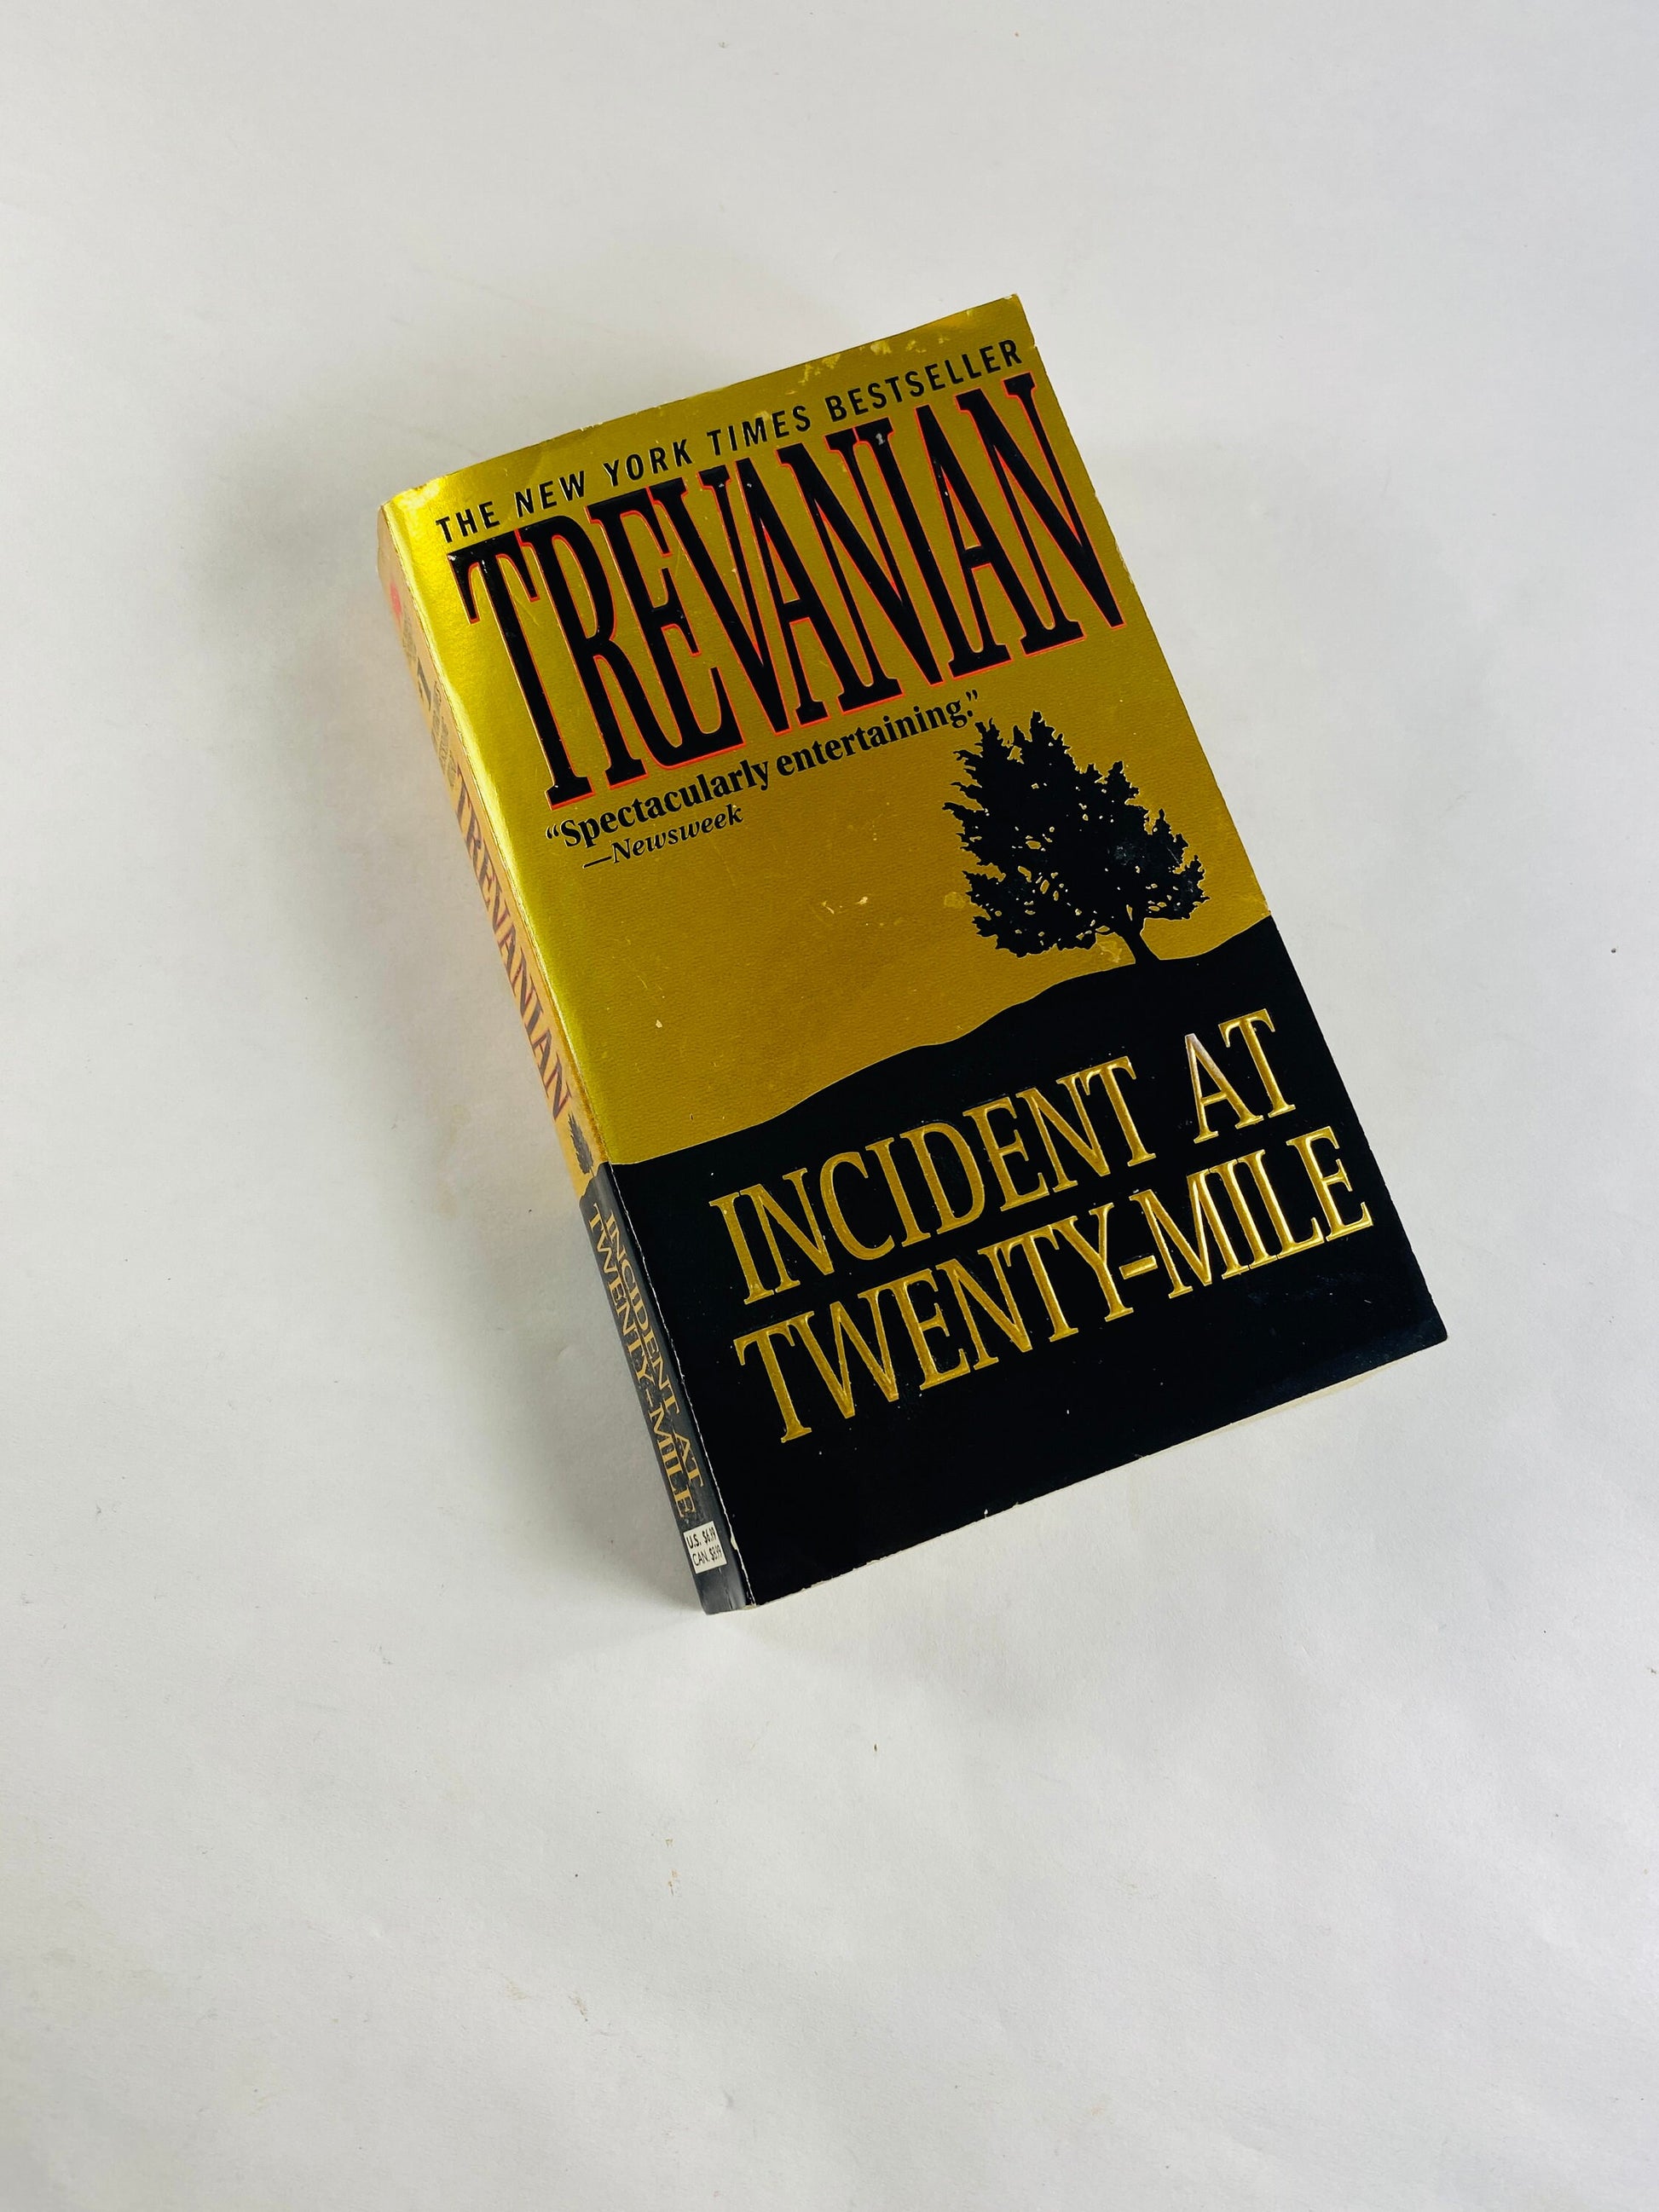 Incident at Twenty-Mile vintage book by Trevanian American Western about a madman escaped from the Territorial Prison at Laramie